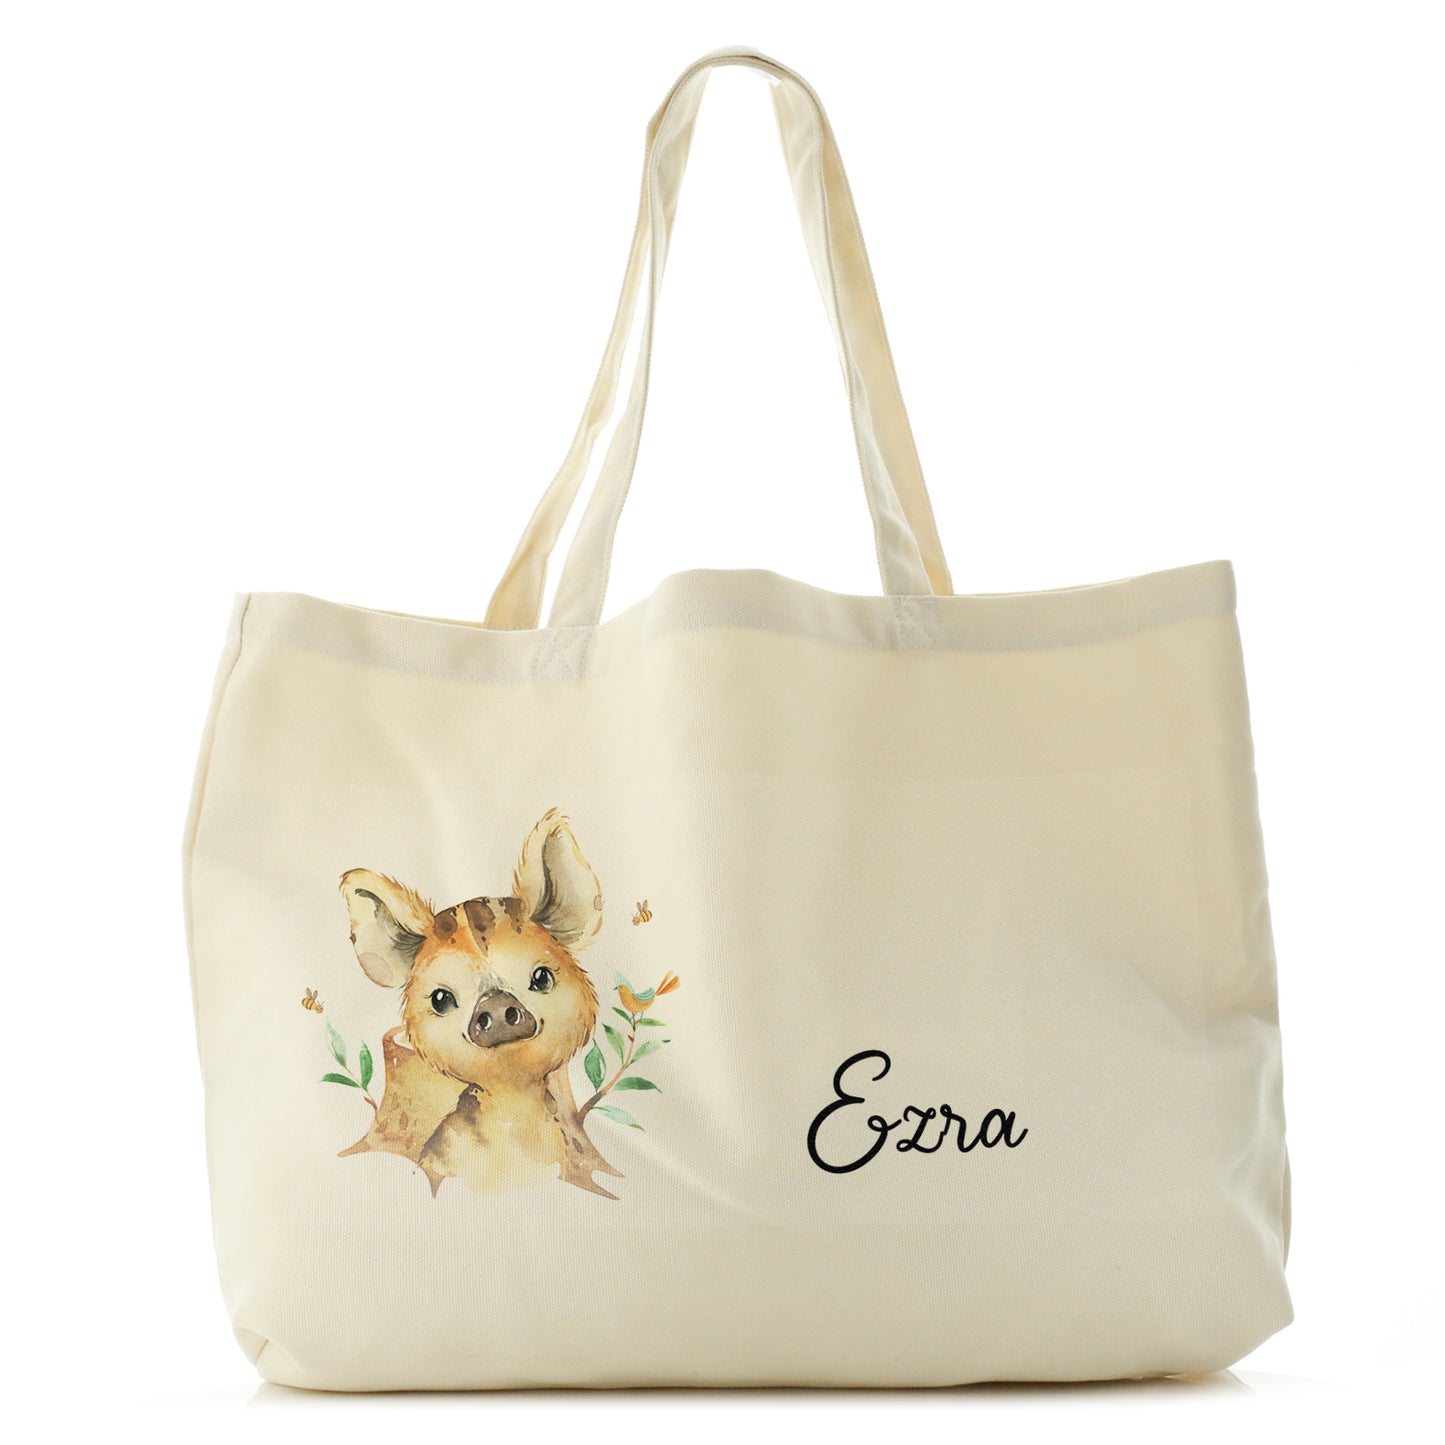 Personalised Canvas Tote Bag with Wild Boar Piglet with Bird and Bees and Cute Text